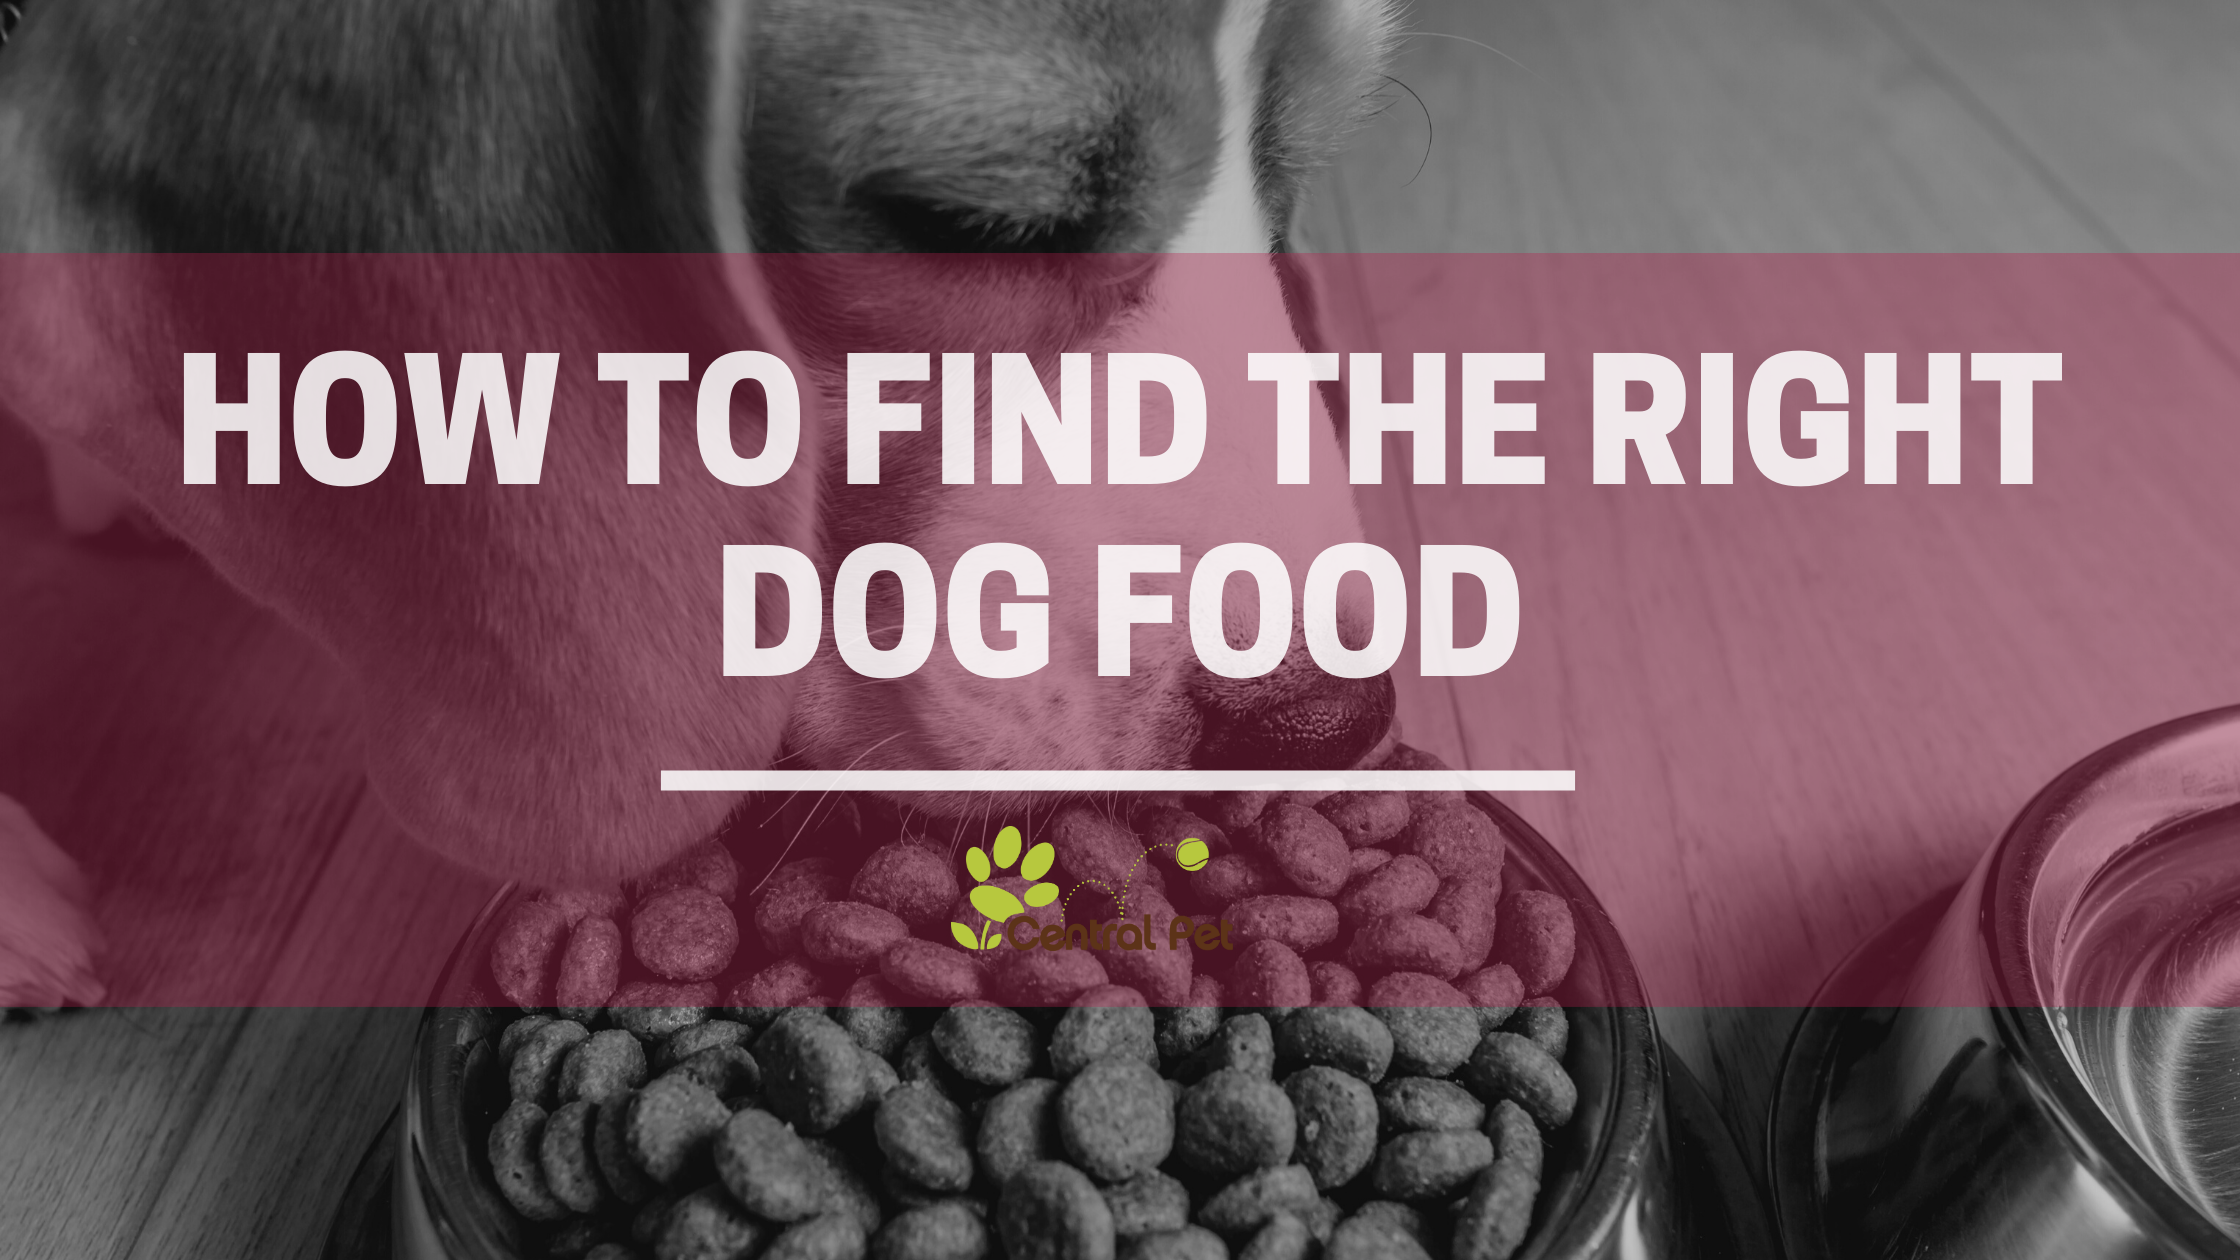 Picking the Right Dog Food for Your Dog